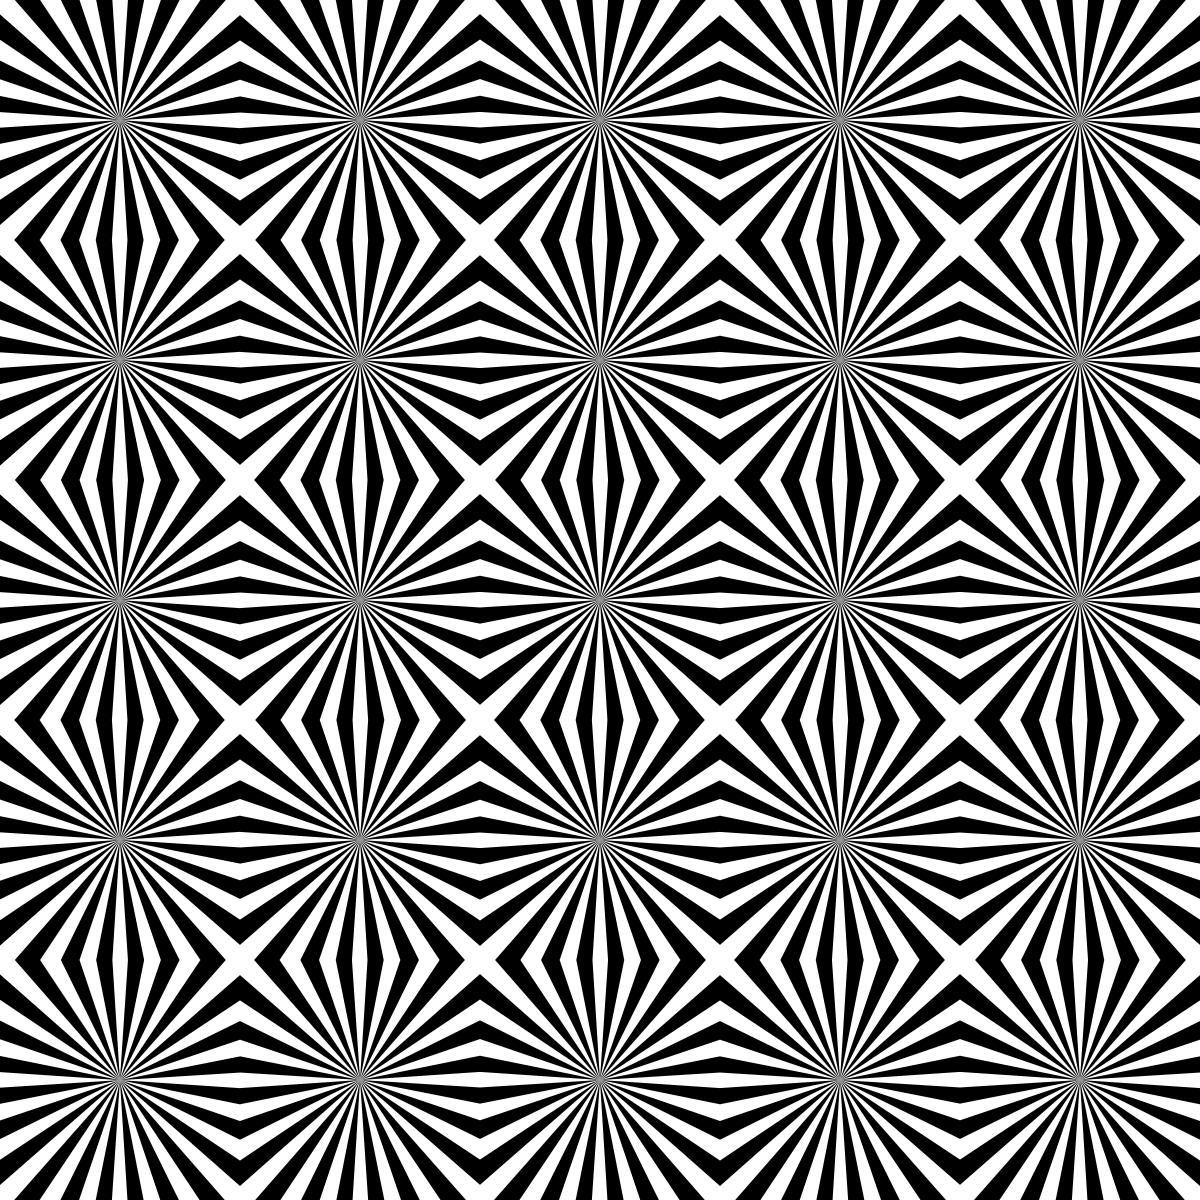 Optical illusions image download for free